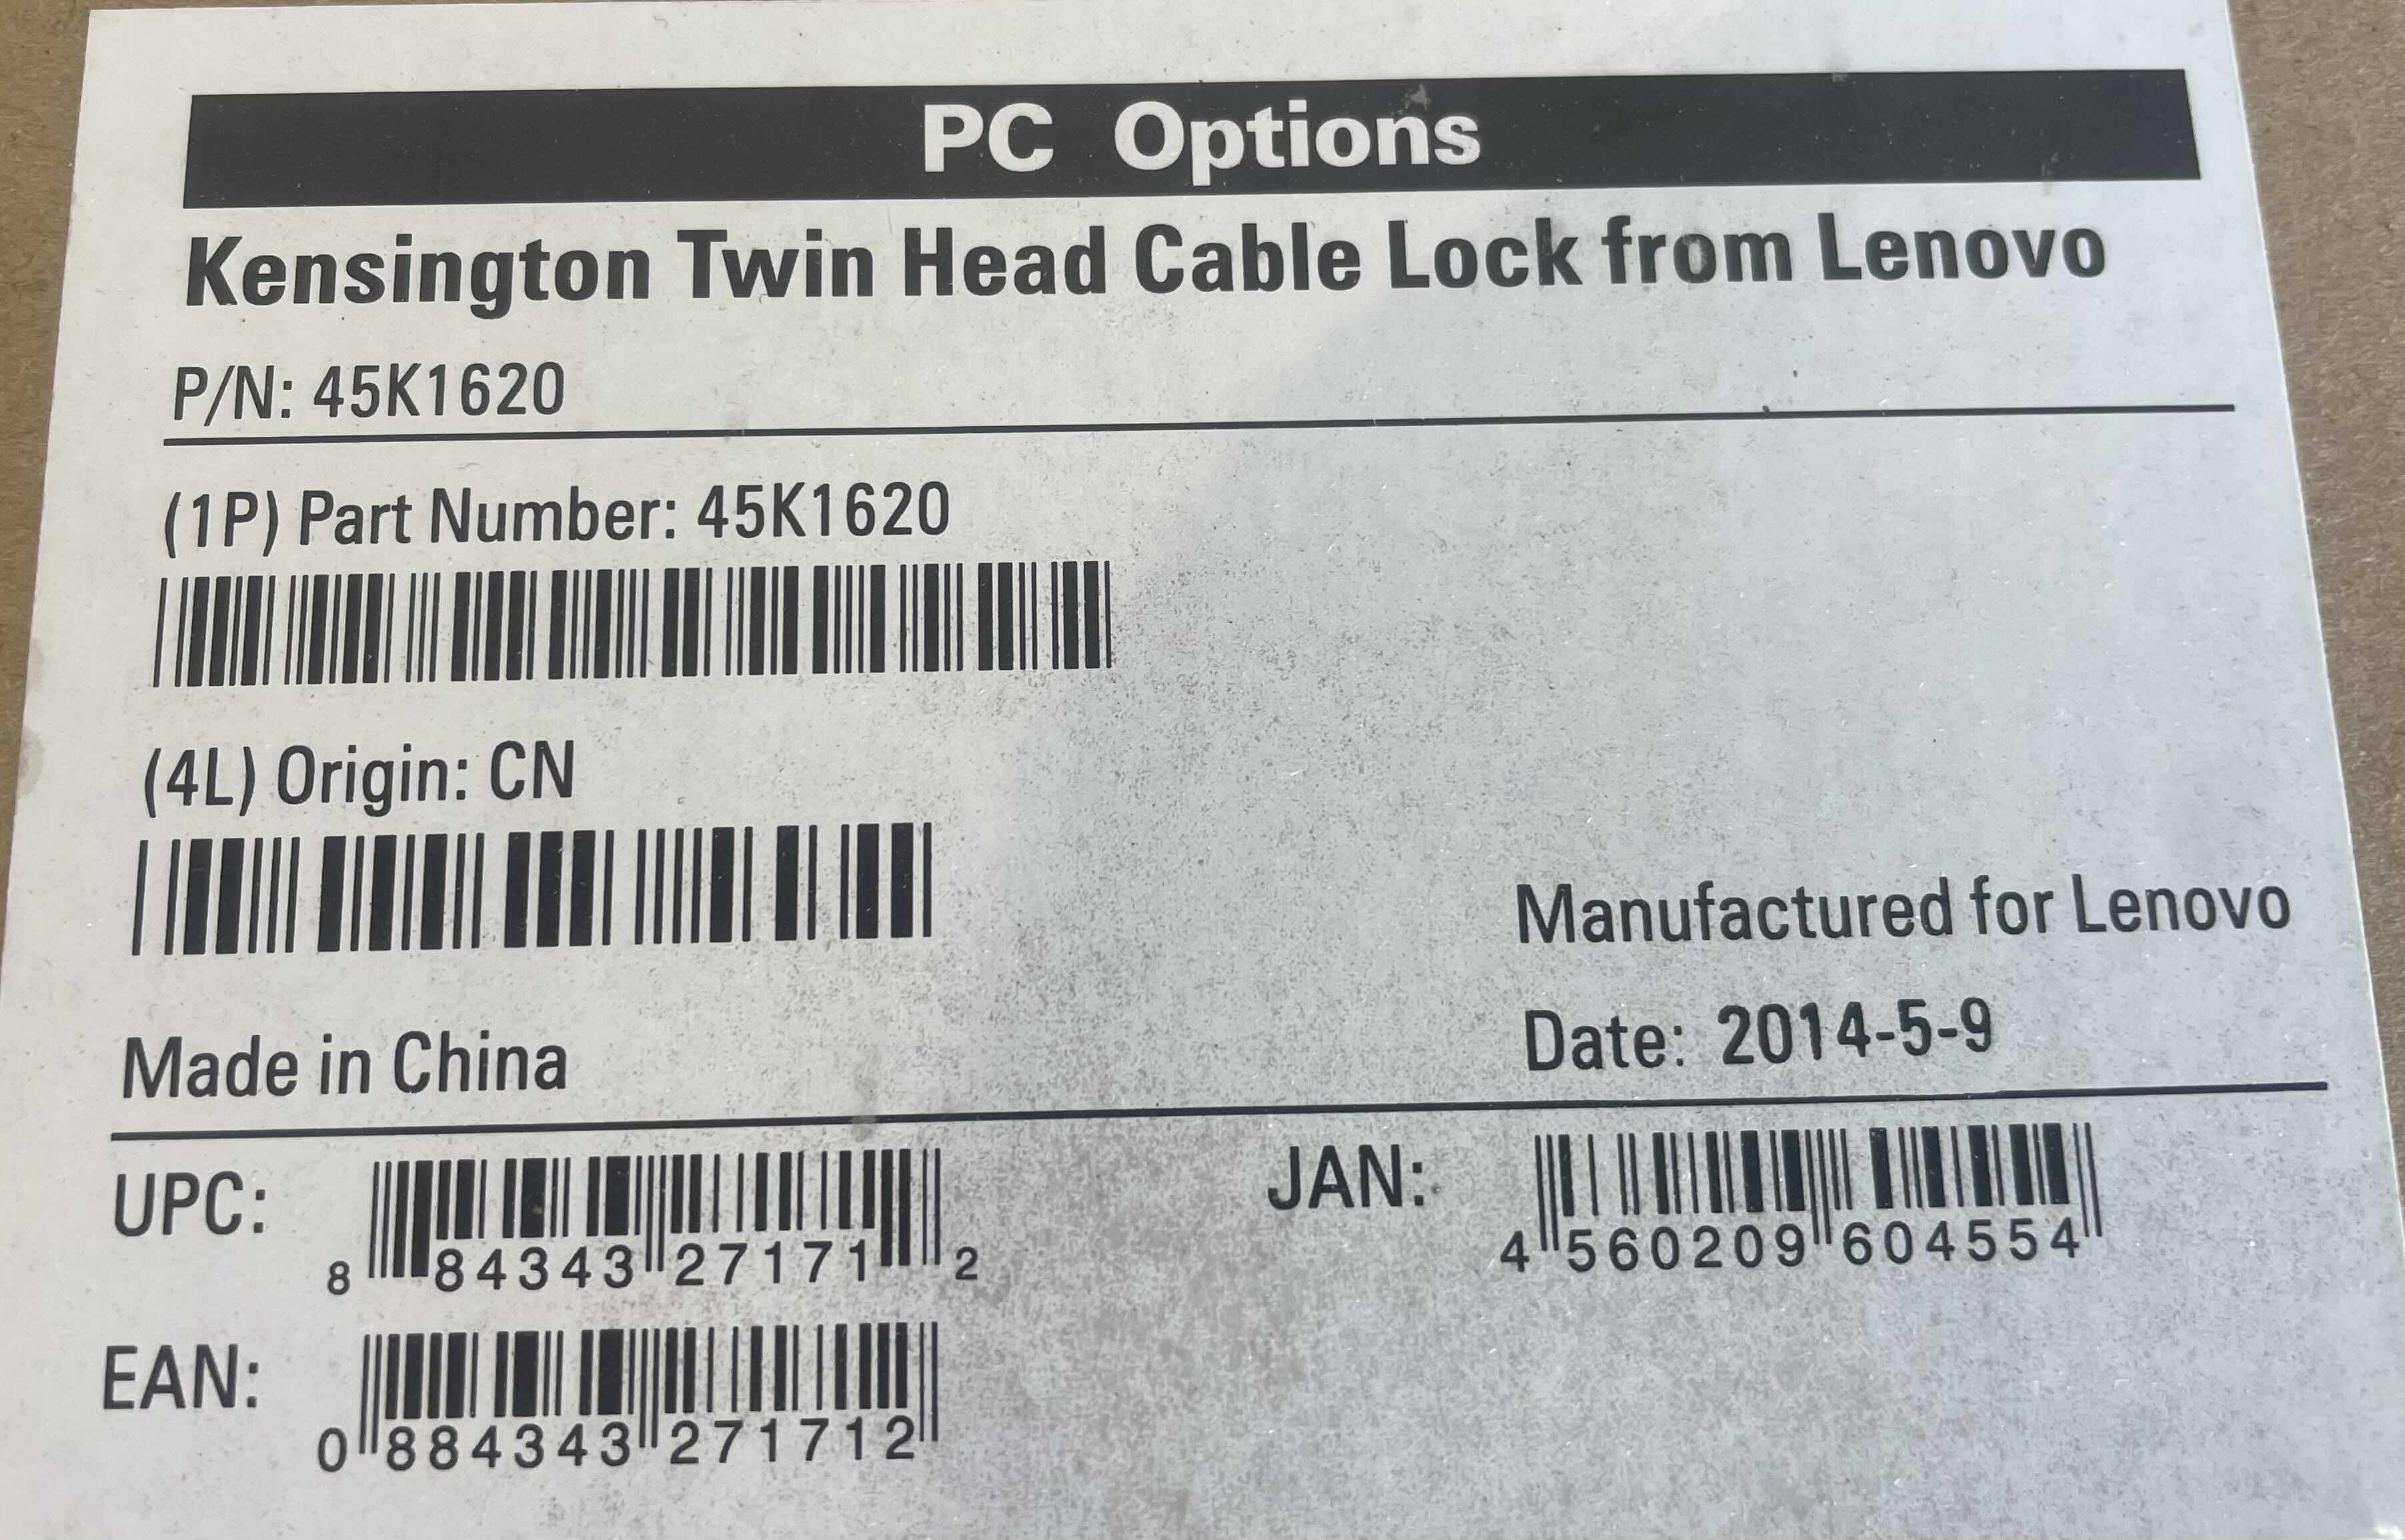 Photo 3 of LENOVO 45K1620 KENSINGTON TWIN HEAD CABLE LOCK FROM LENOVO - SECURITY CABLE LOCK (7)